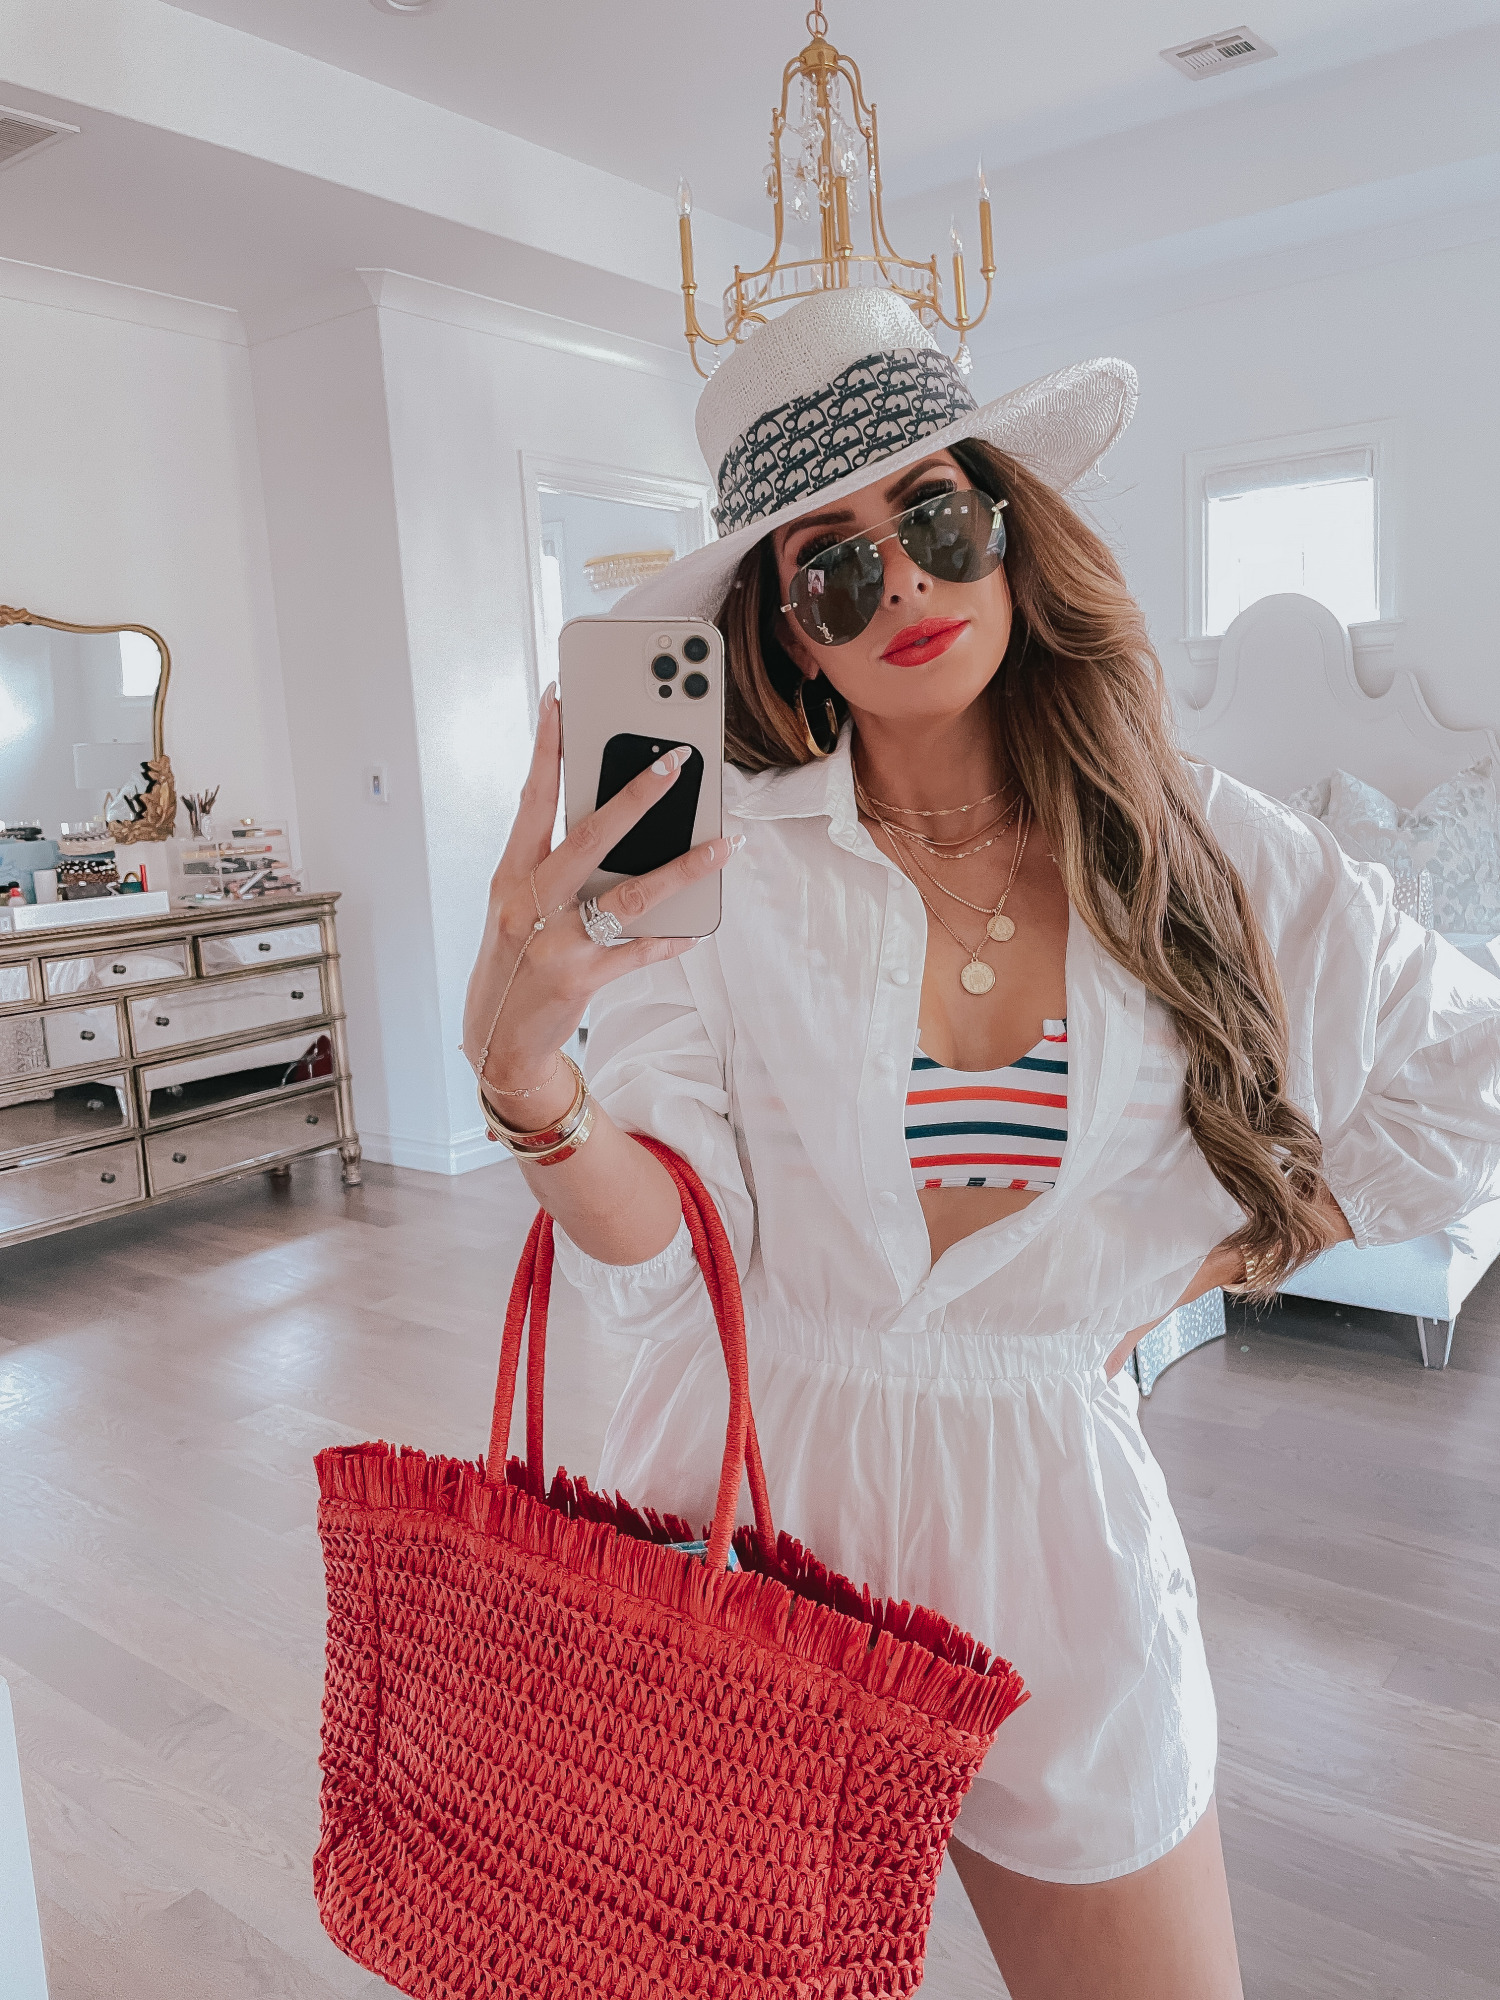 july 4 outfit inspiration 2021, pinterest july 4 outfit, dior scarf tied around hat, Emily gemma | June Instagram Recap by popular US fashion blog, The Sweetest Thing: image of Emily Gemma wearing a white straw hat, white romper, white, red and blue stripe swimsuit top and holding a red straw tote bag. 